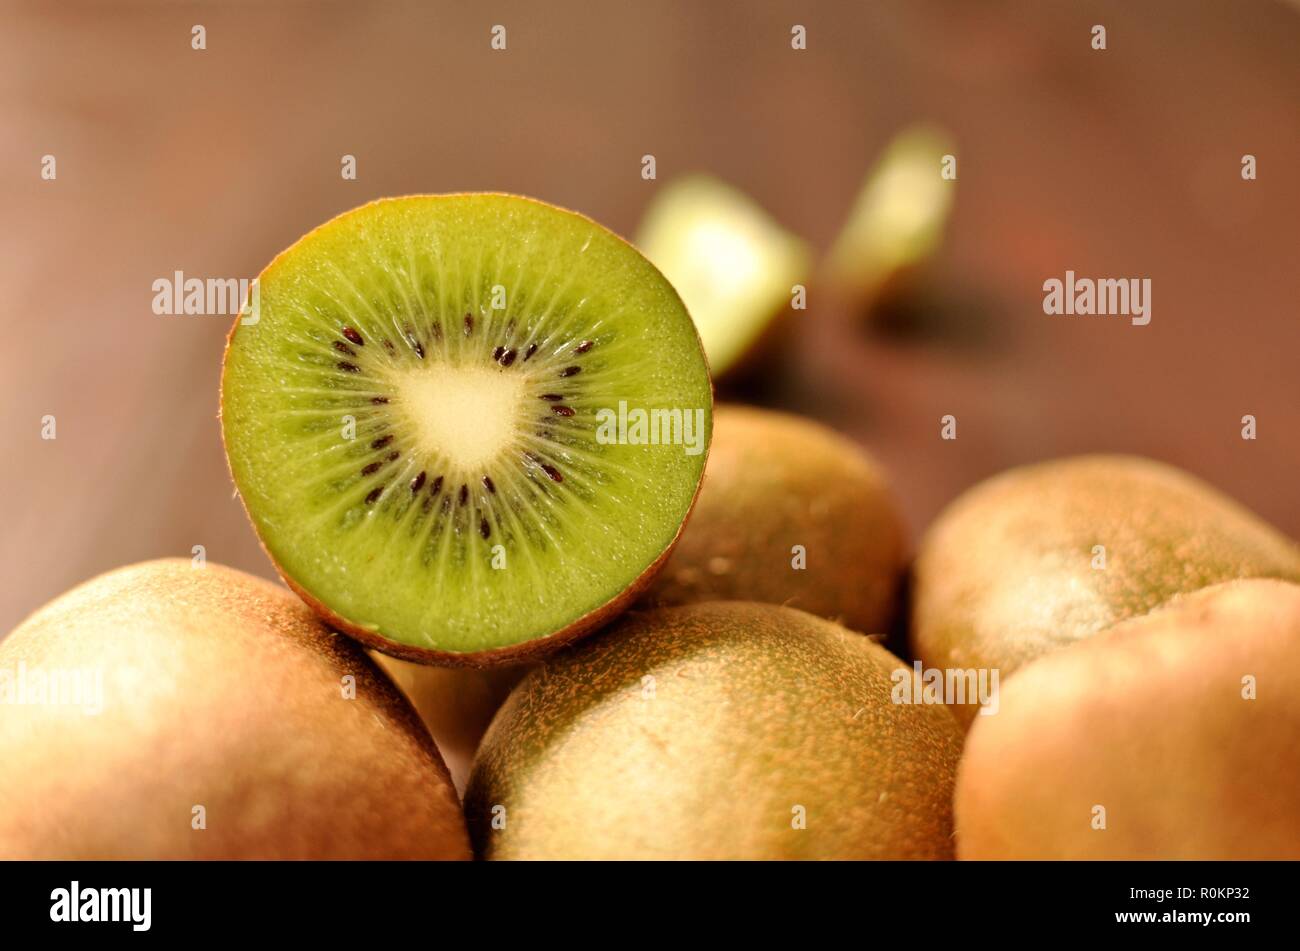 Group of ripe whole kiwi fruit and half kiwi fruit on brown wooden background. Front view, selective focus Stock Photo